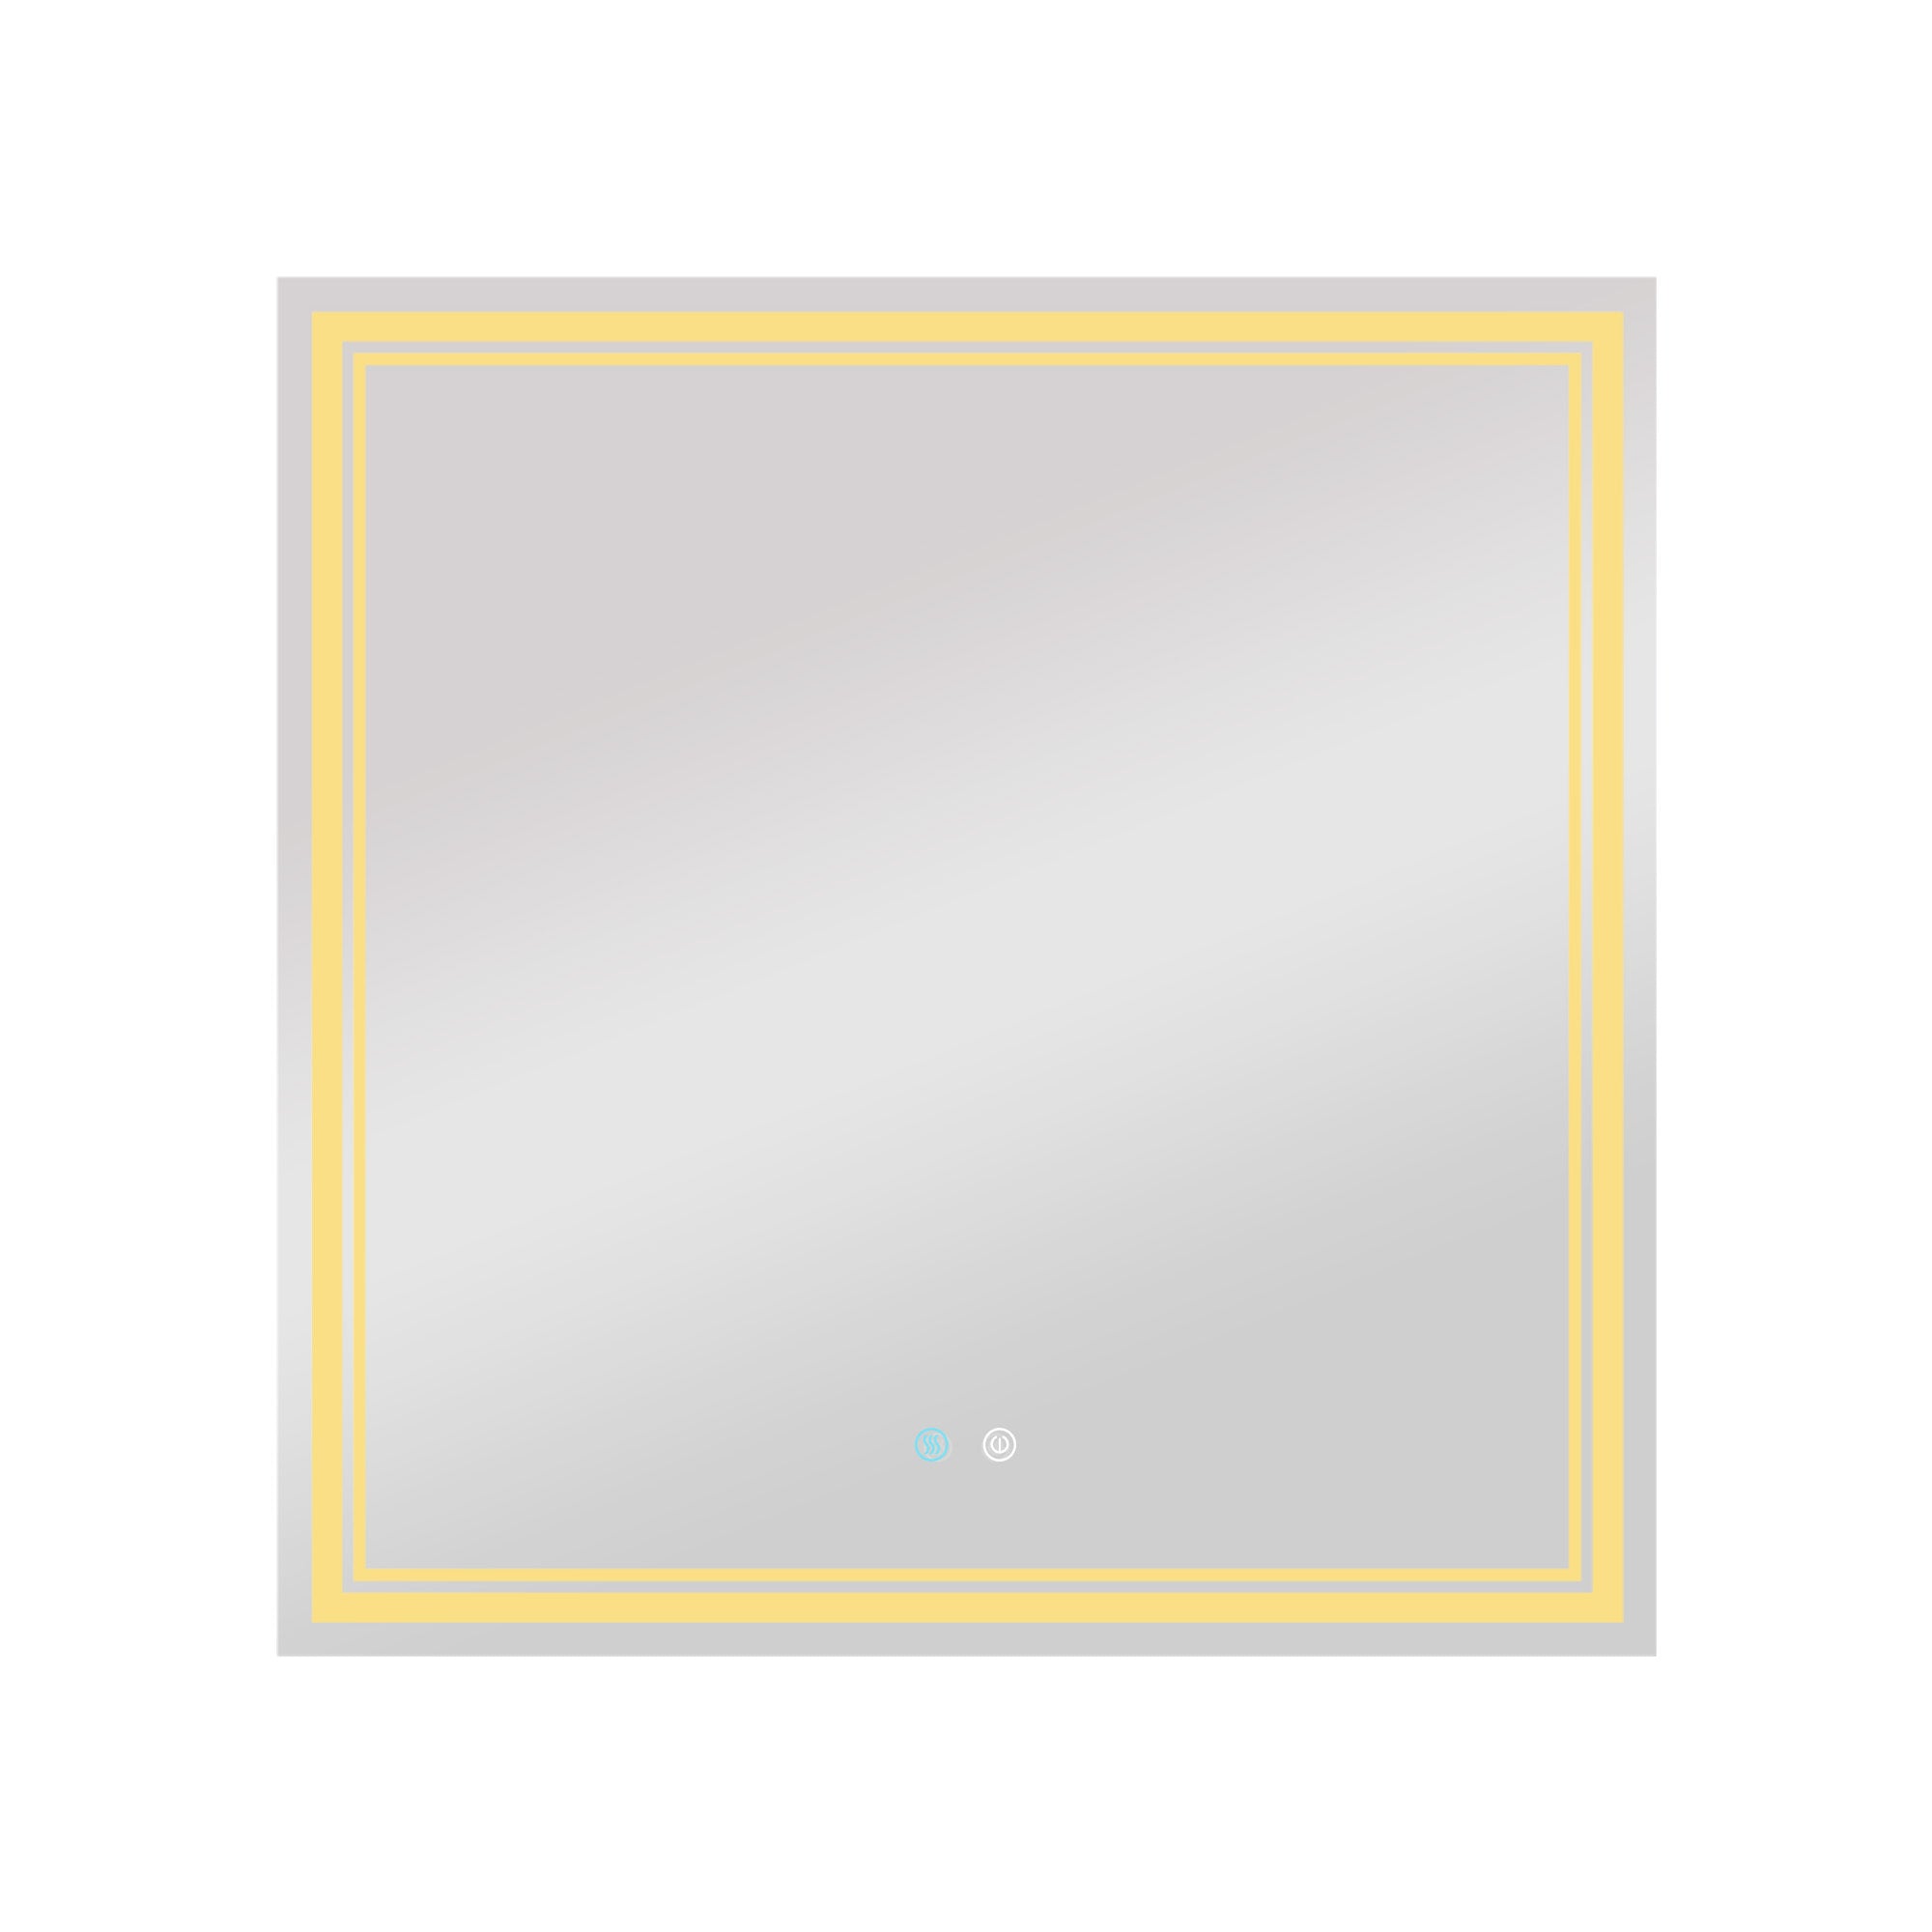 LED Mirror for Bathroom, Adjustable 3 Color, Dimmable Vanity Mirror with Lights, Anti-Fog, Touch Control Wall Mounted Bathroom Mirror 36 x 36 Vertical